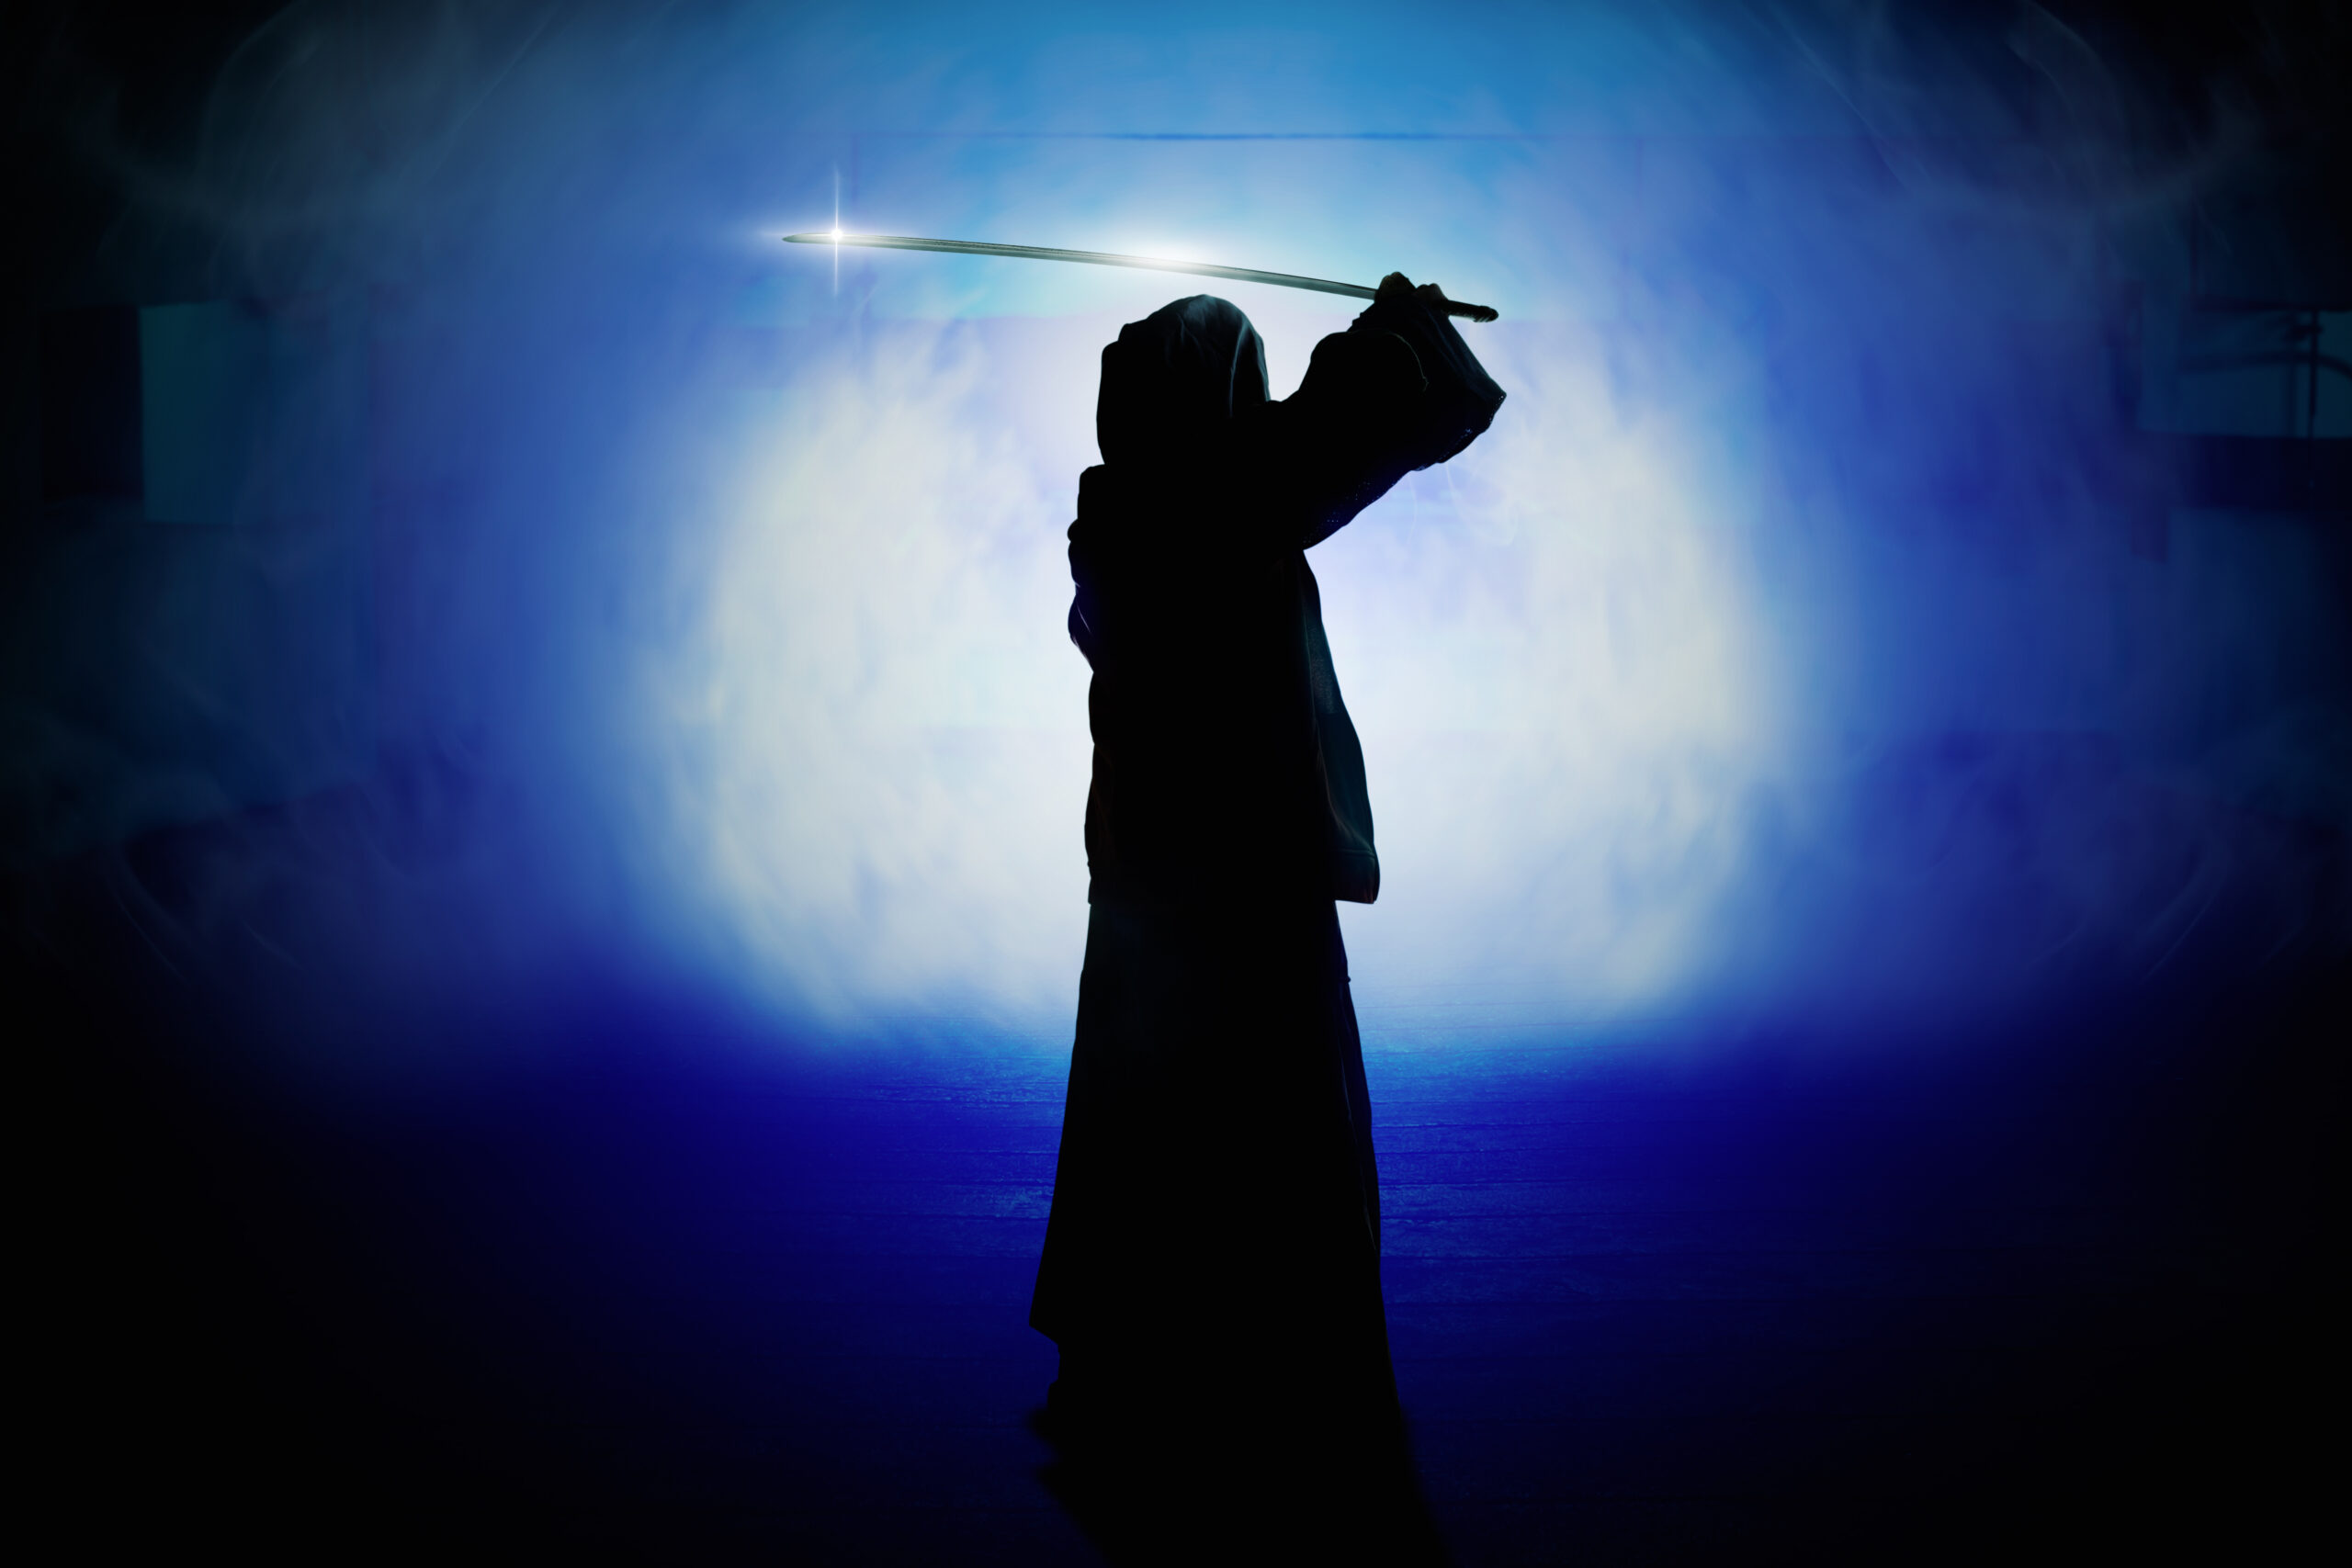 robed figure holding a laser